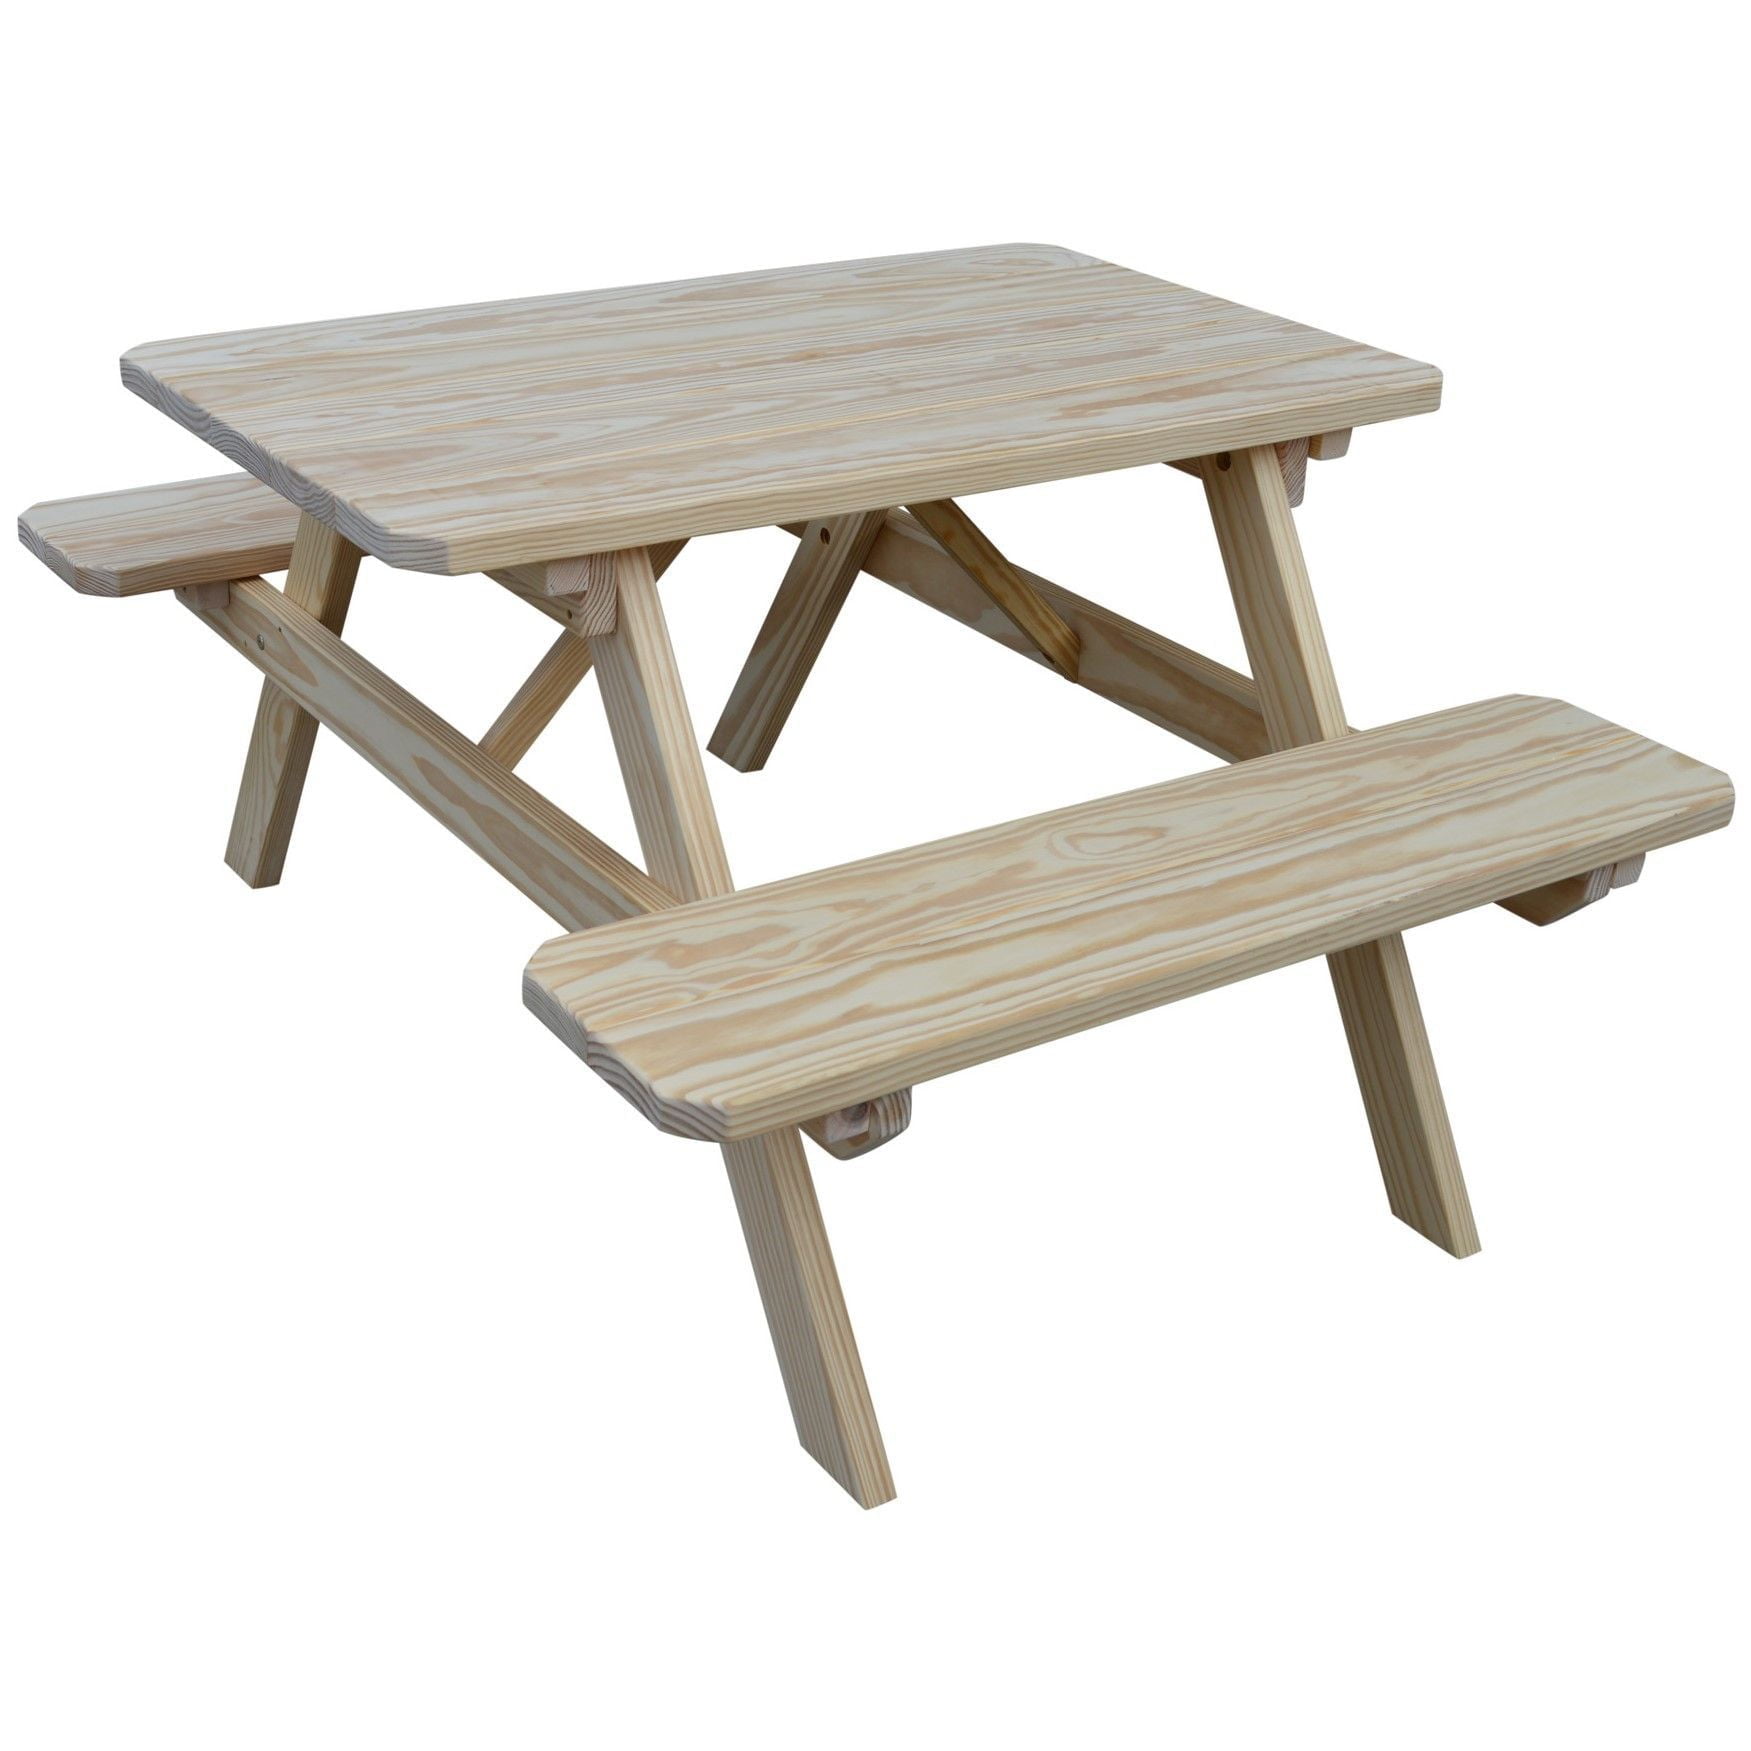 A&L Furniture Cedar Picnic Table with Attached Benches-Multiple Sizes Available